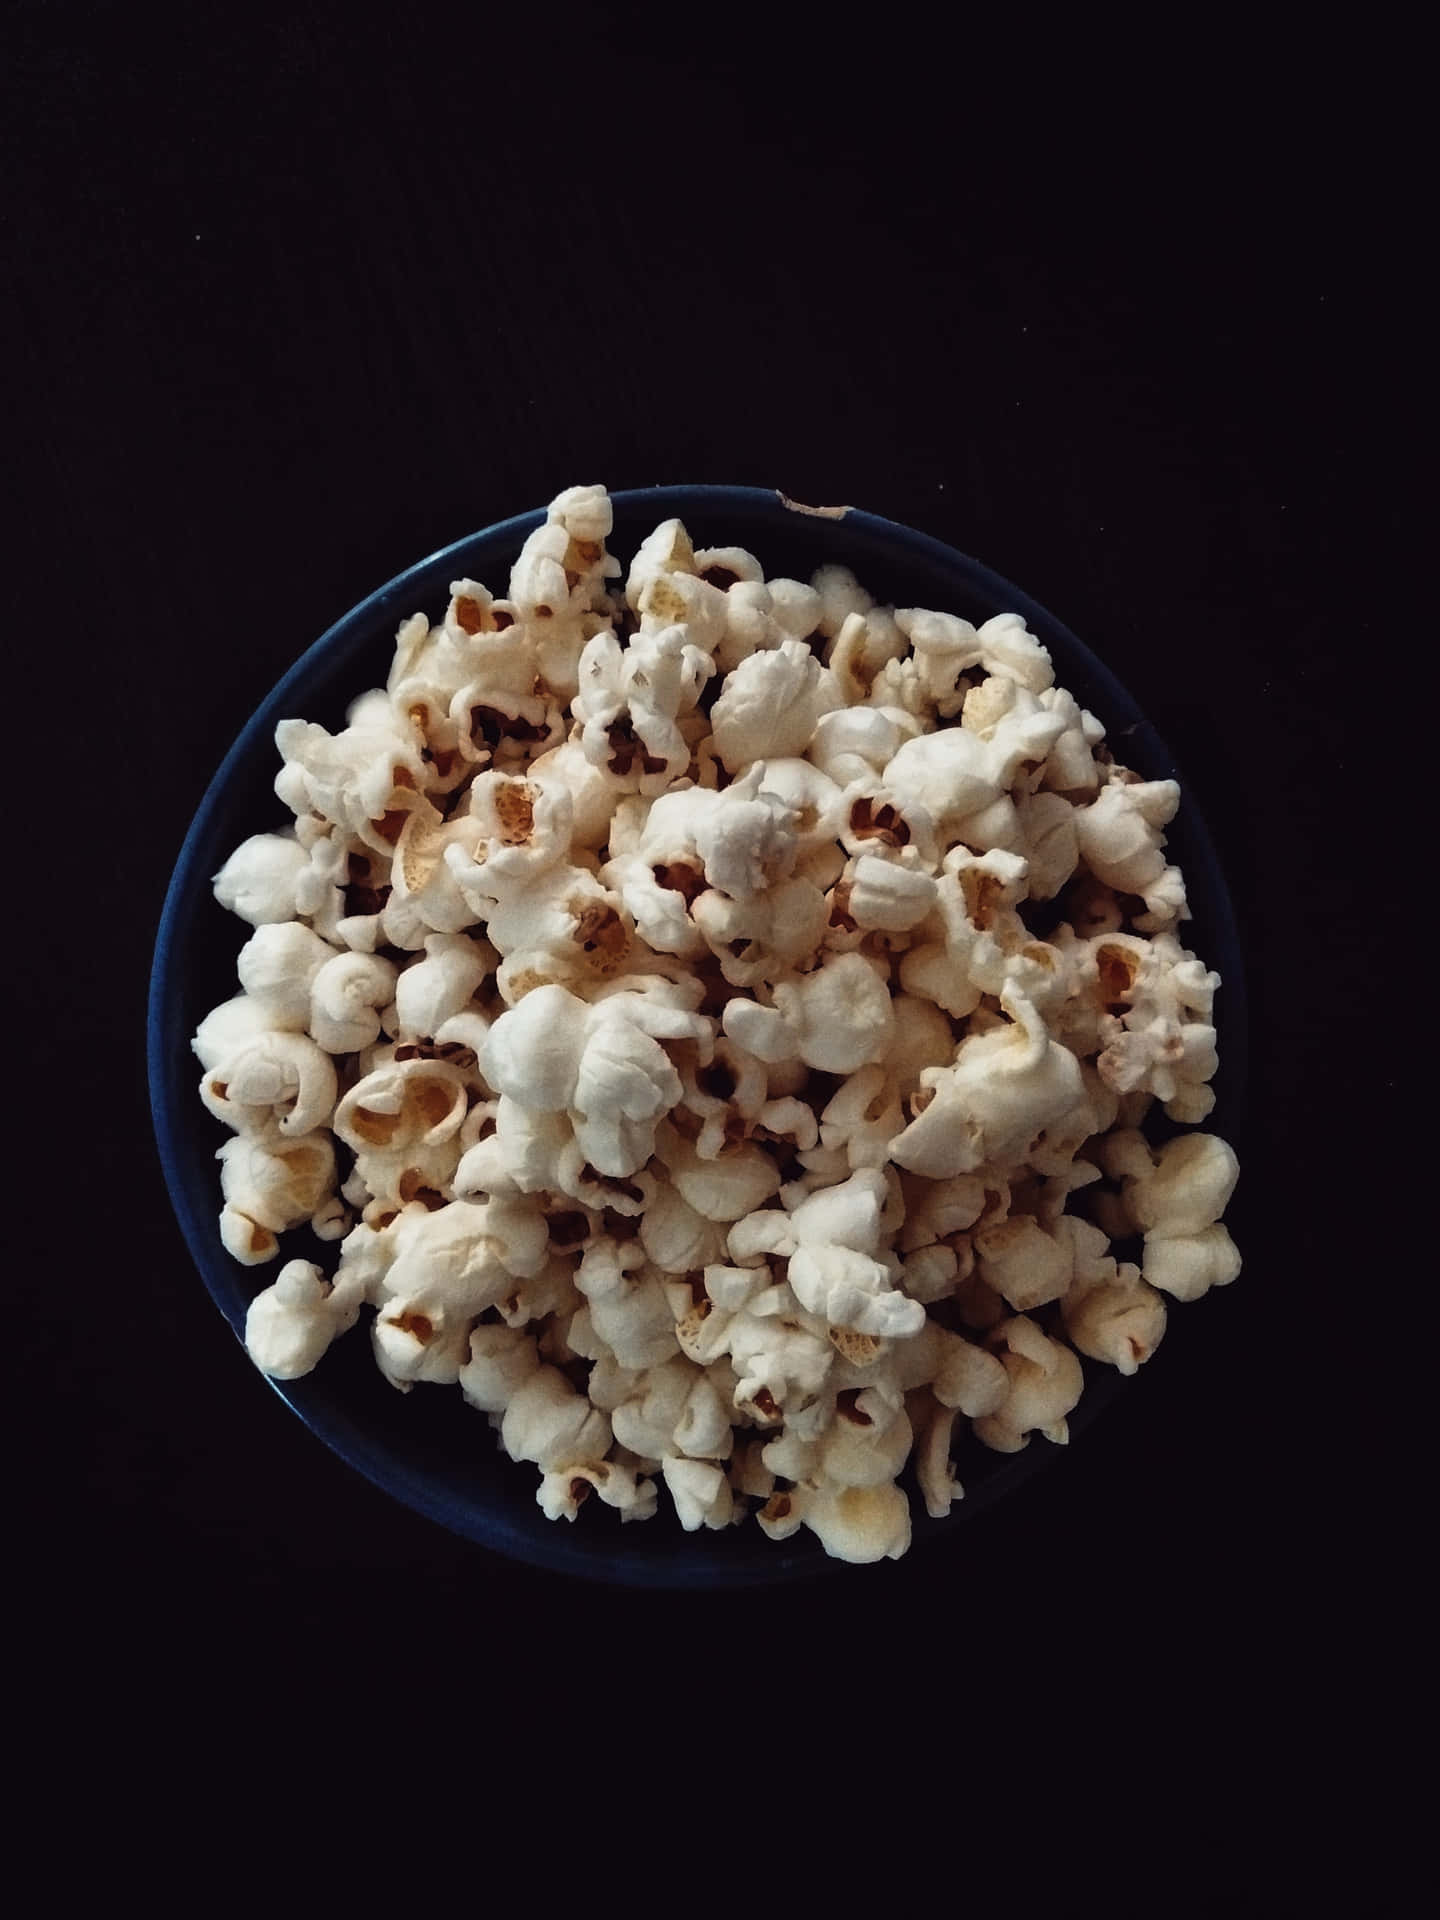 A Bowl Of Popcorn On A Black Table